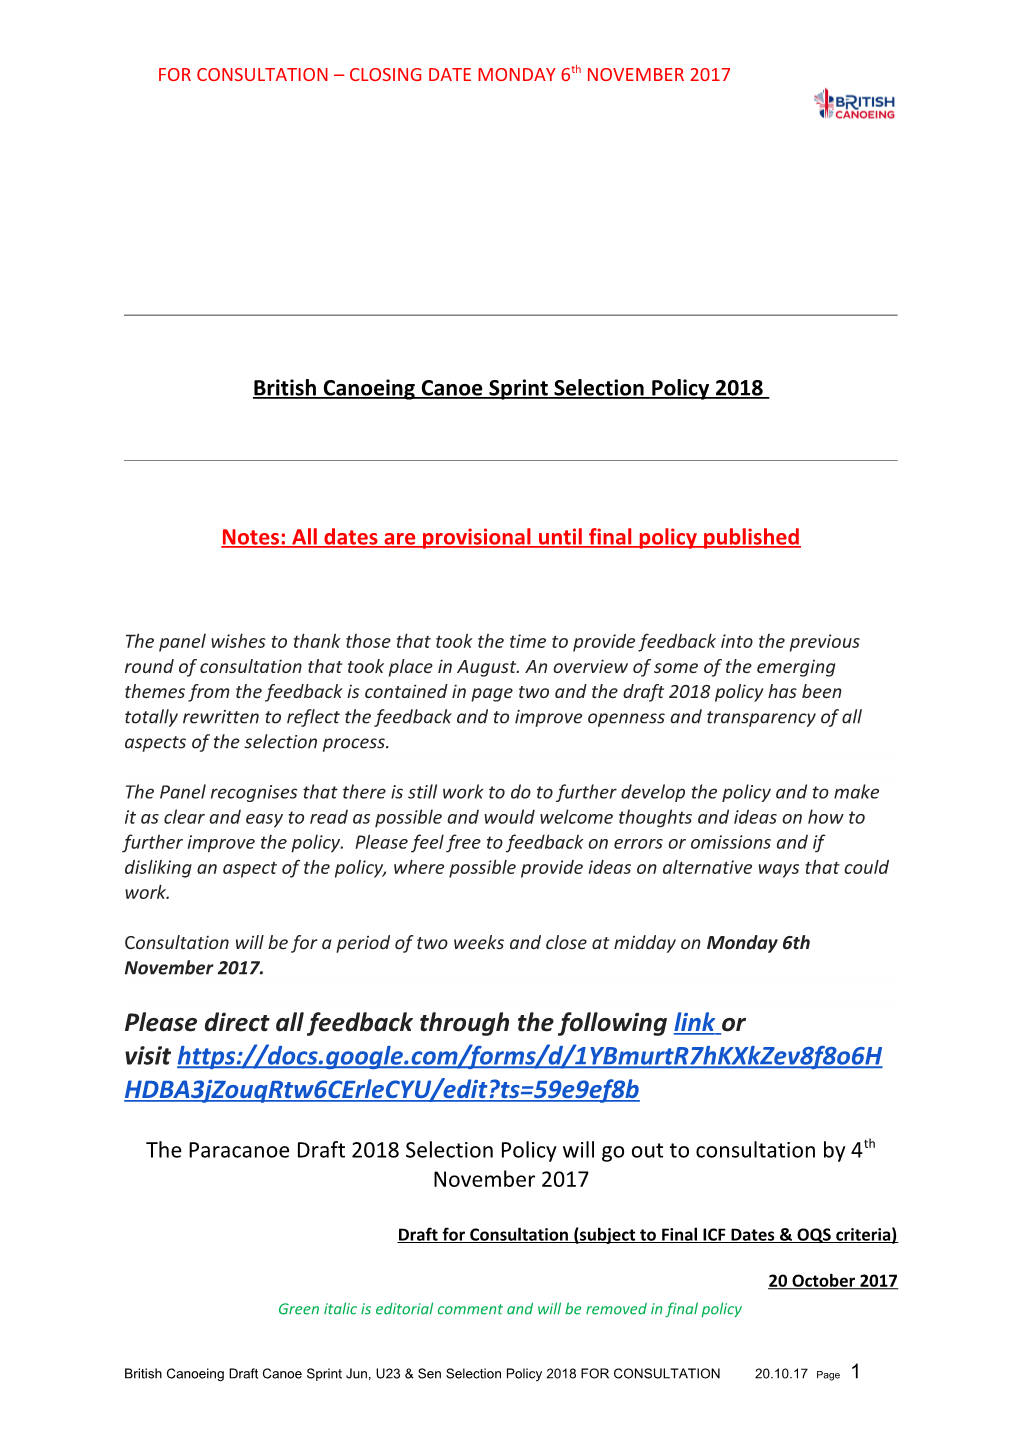 British Canoeing Canoe Sprint Selection Policy 2018